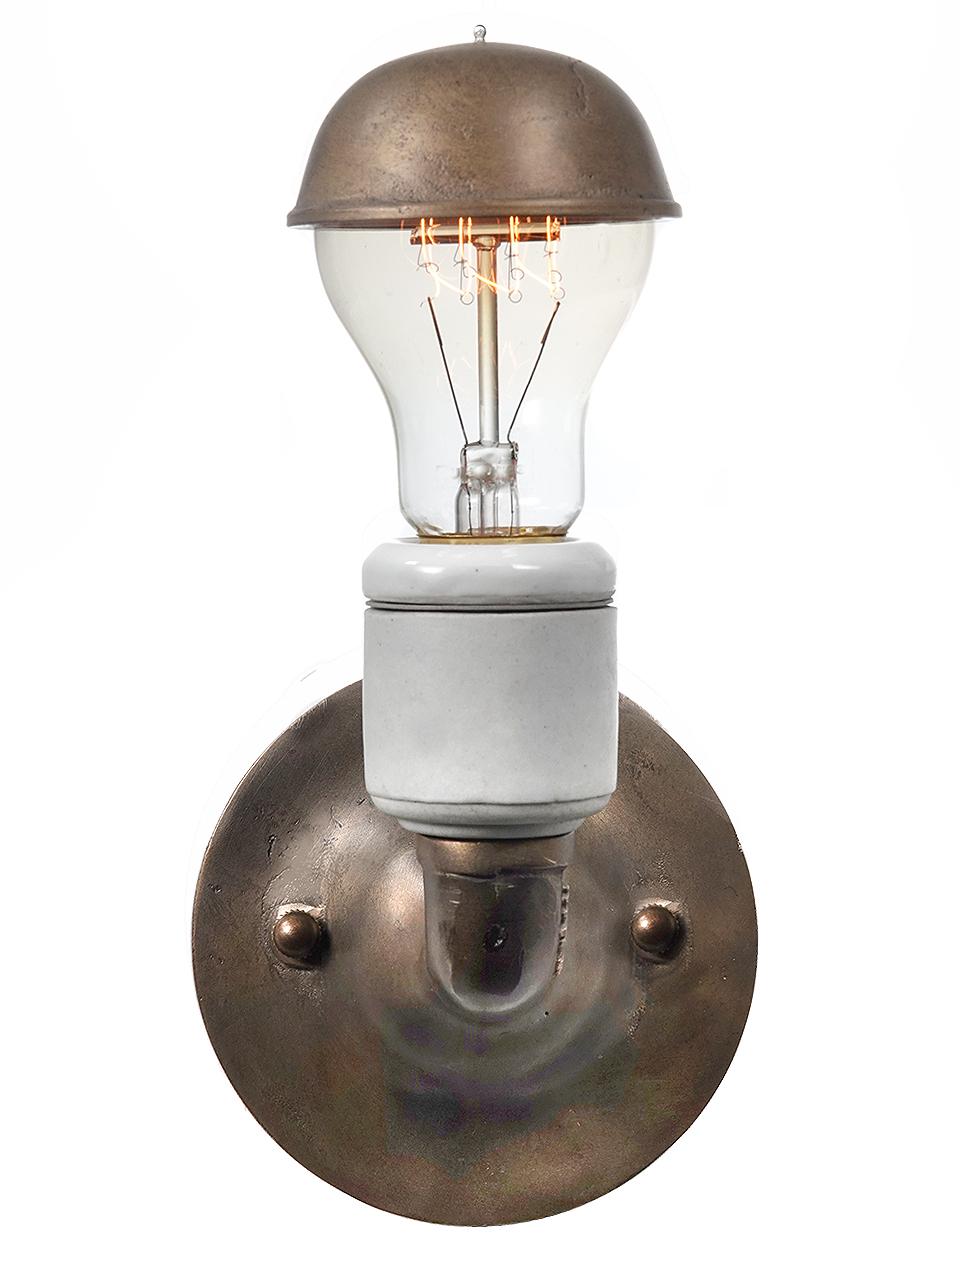 We have a nice collection of these simple brass and porcelain sconces. This is as simple and elegant as it gets. It also includes a unique cast brass cap thats will reduce bulb glair.